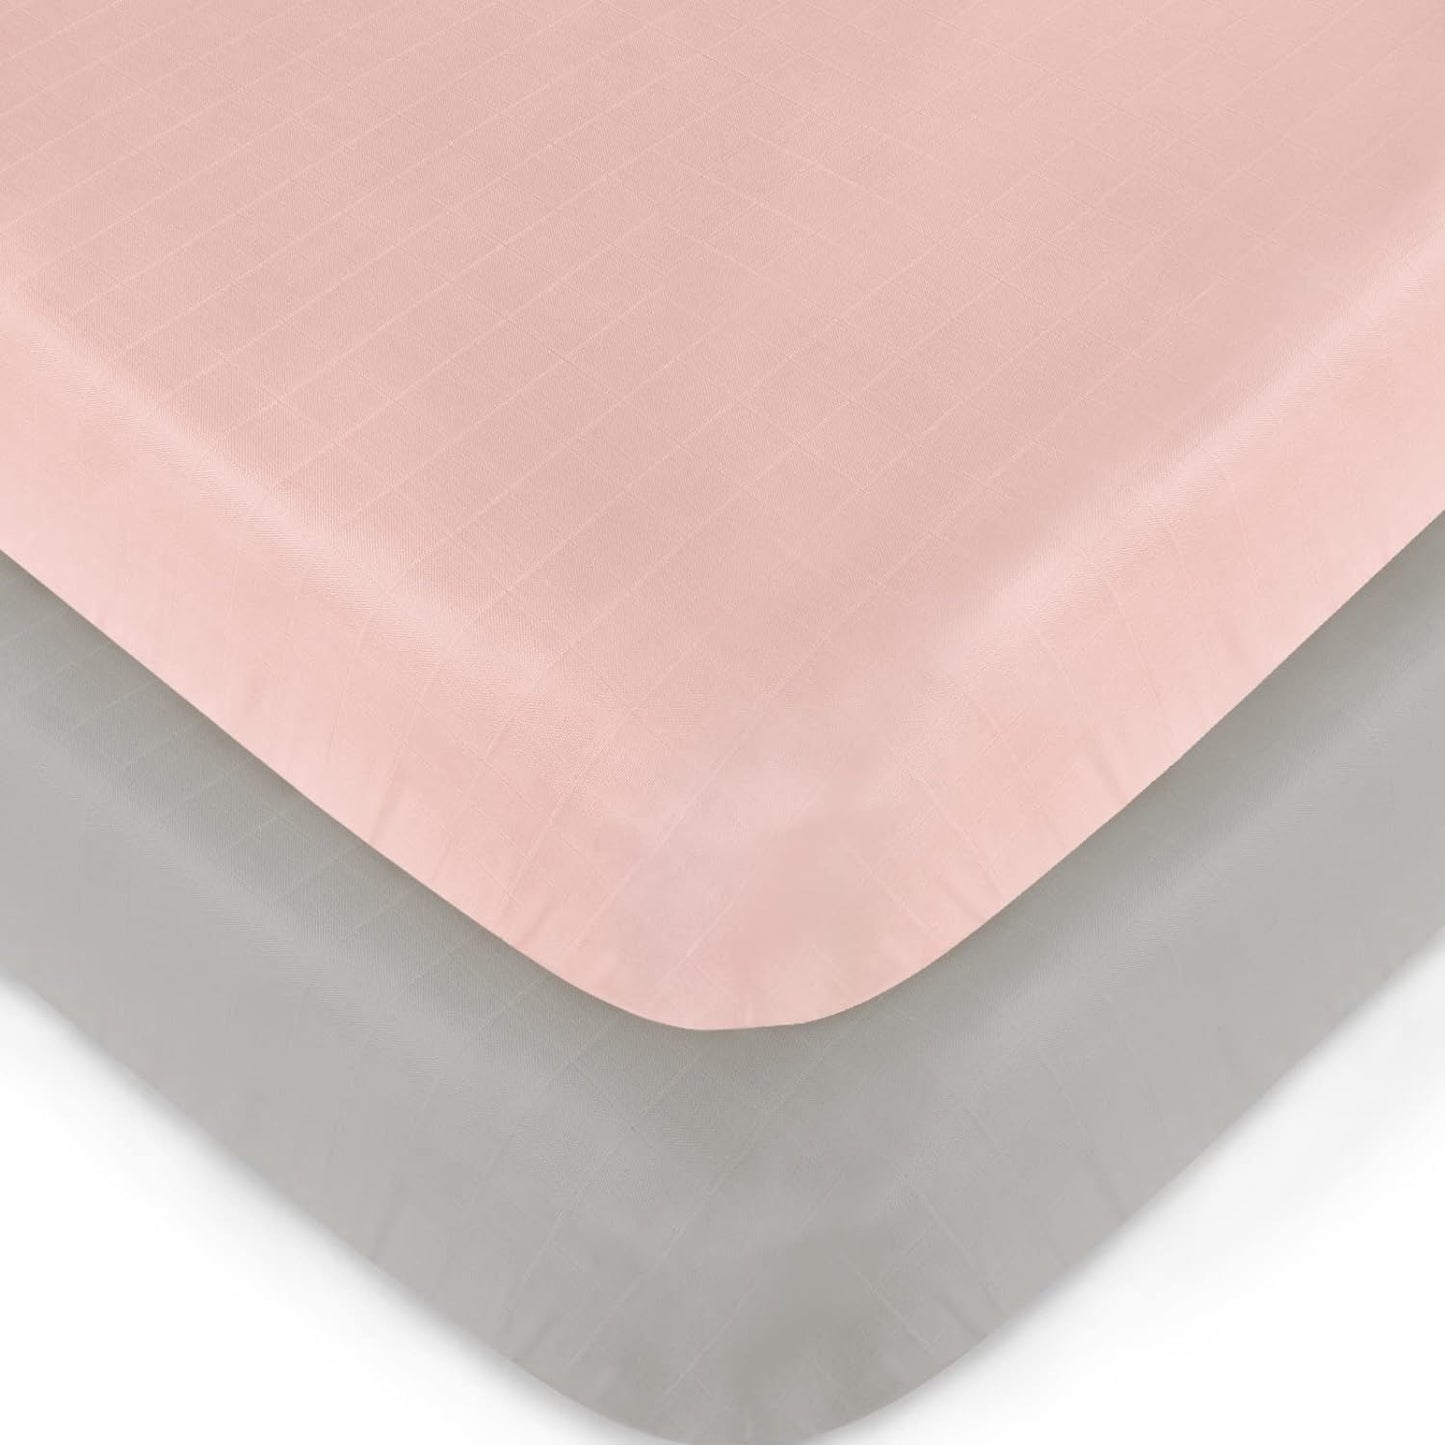 Muslin Crib Sheets - 2 Pack, Ultra Soft and Breathable, Grey & Pink (for Standard Crib/ Toddler Bed)